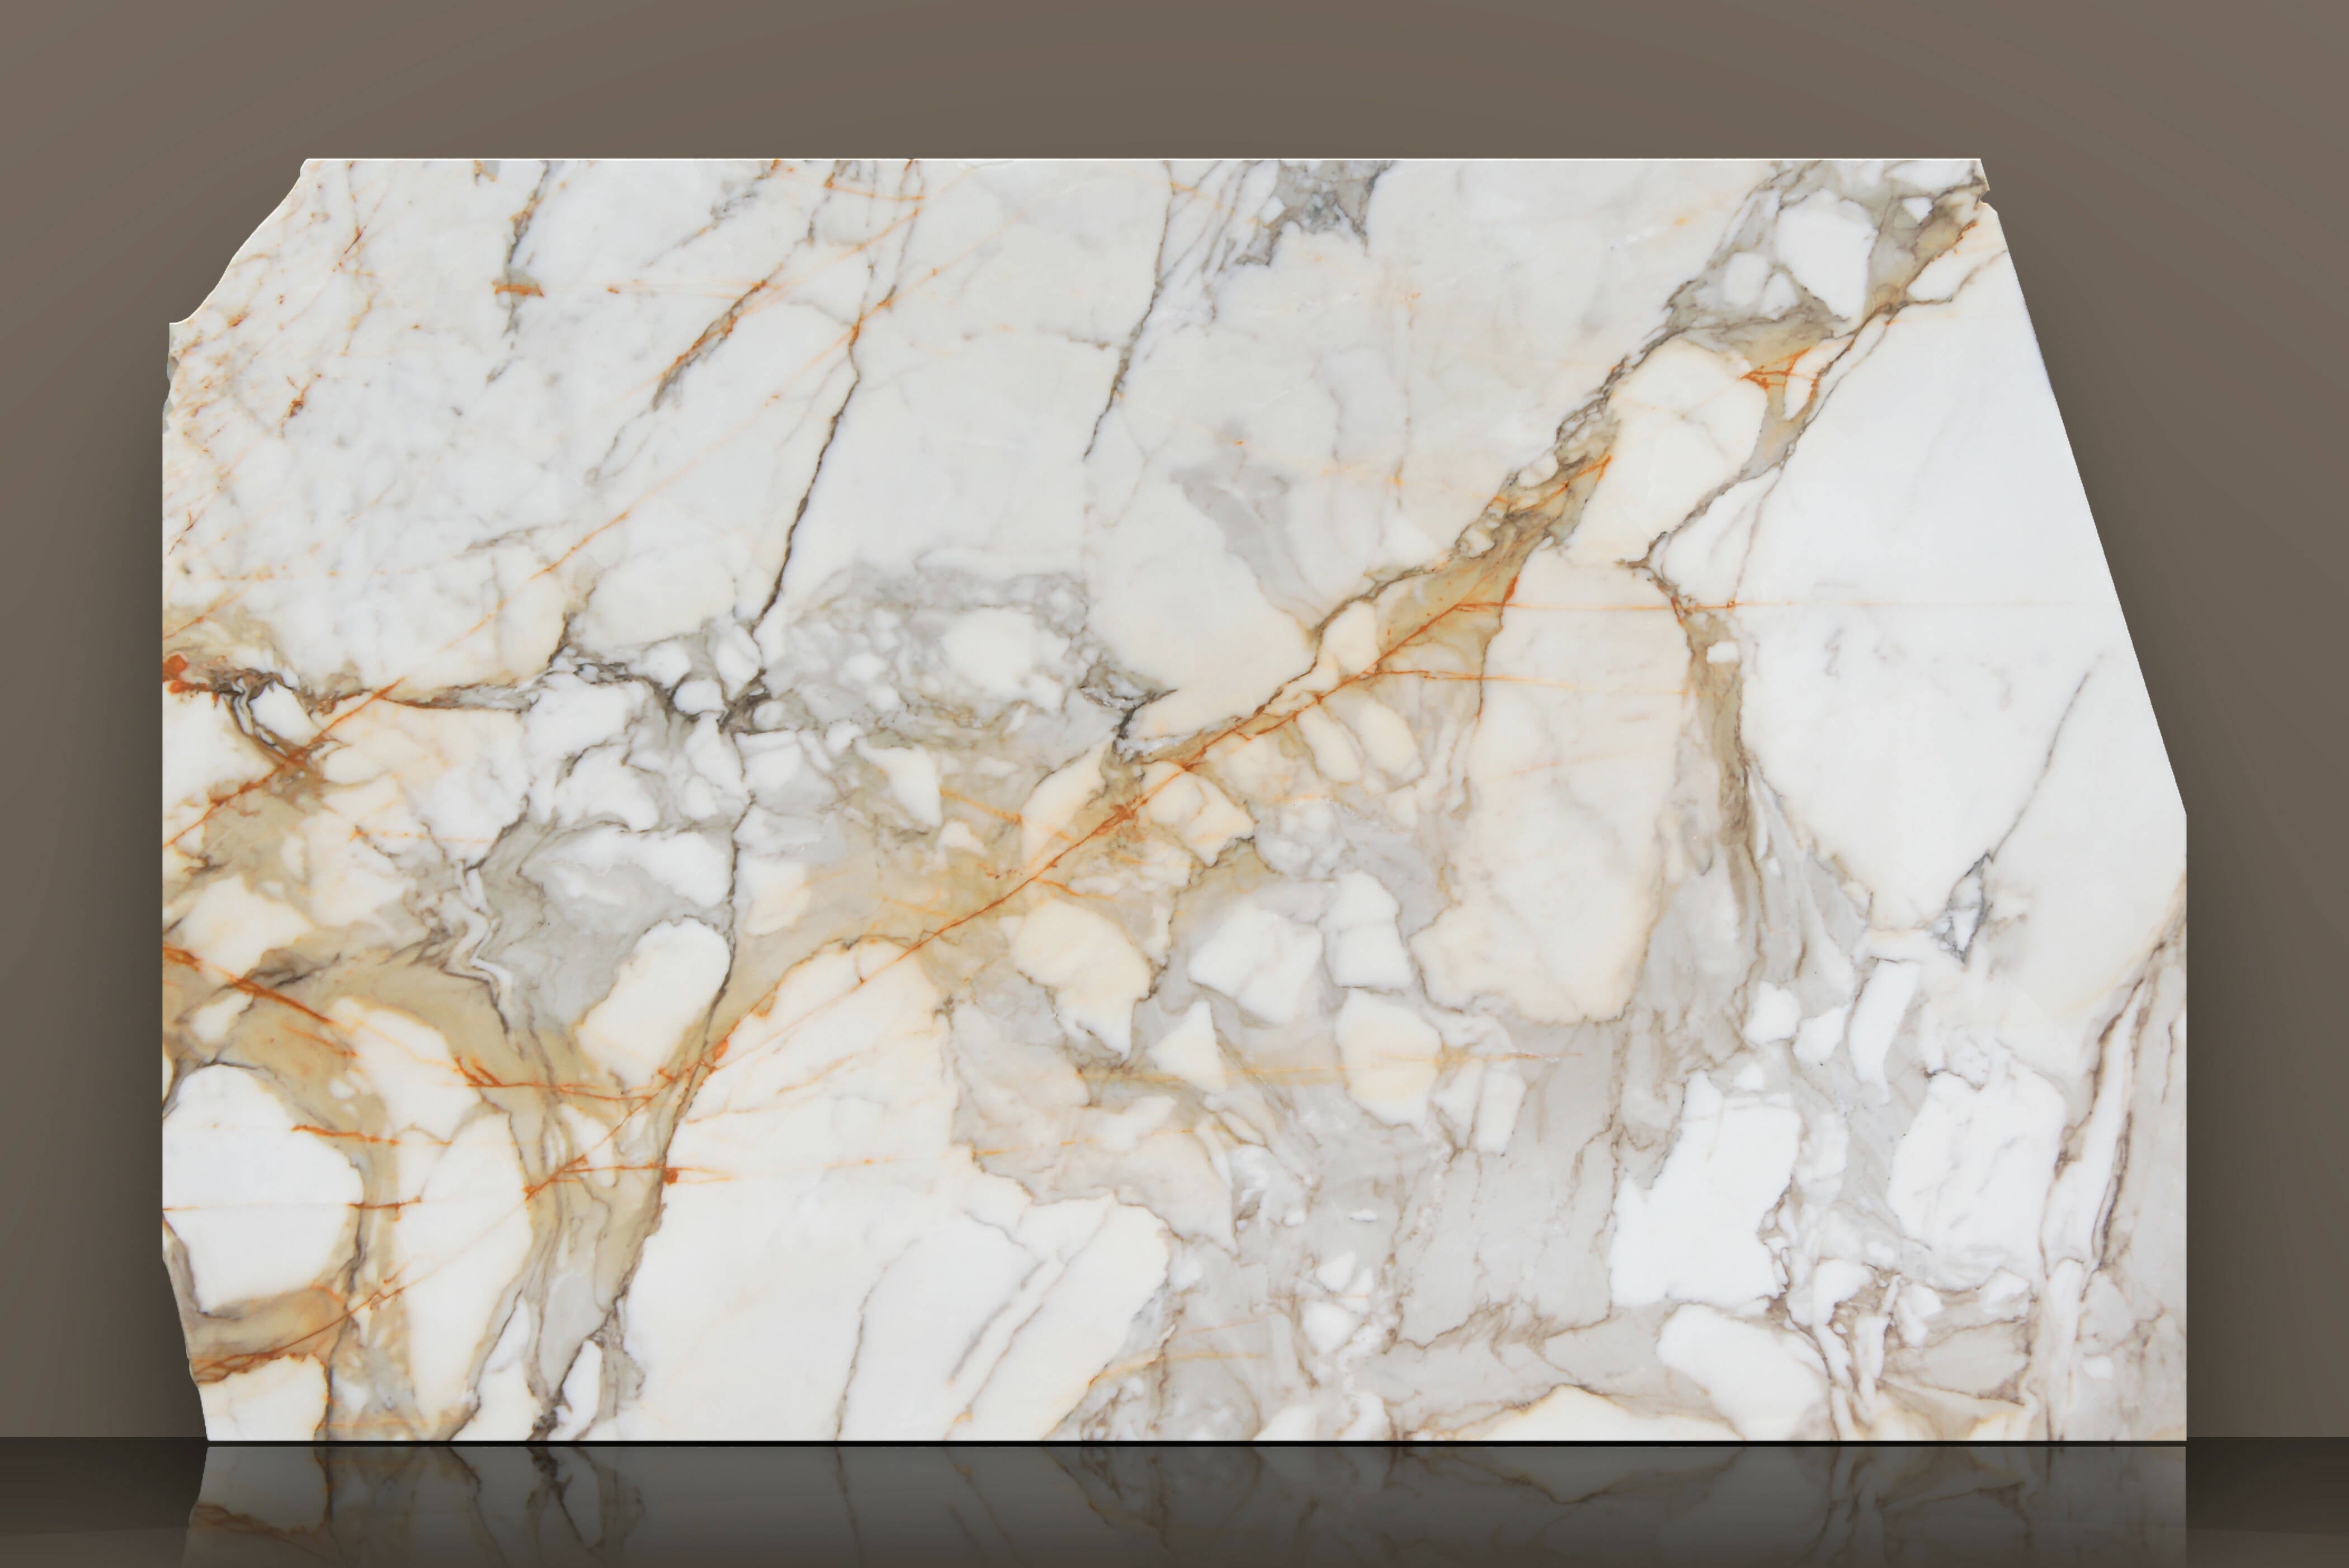 CALACATTA GOLD MACCHIA VECCHIA BOOKMATCHED MARBLE,Marble,Sonic Stone,www.work-tops.com